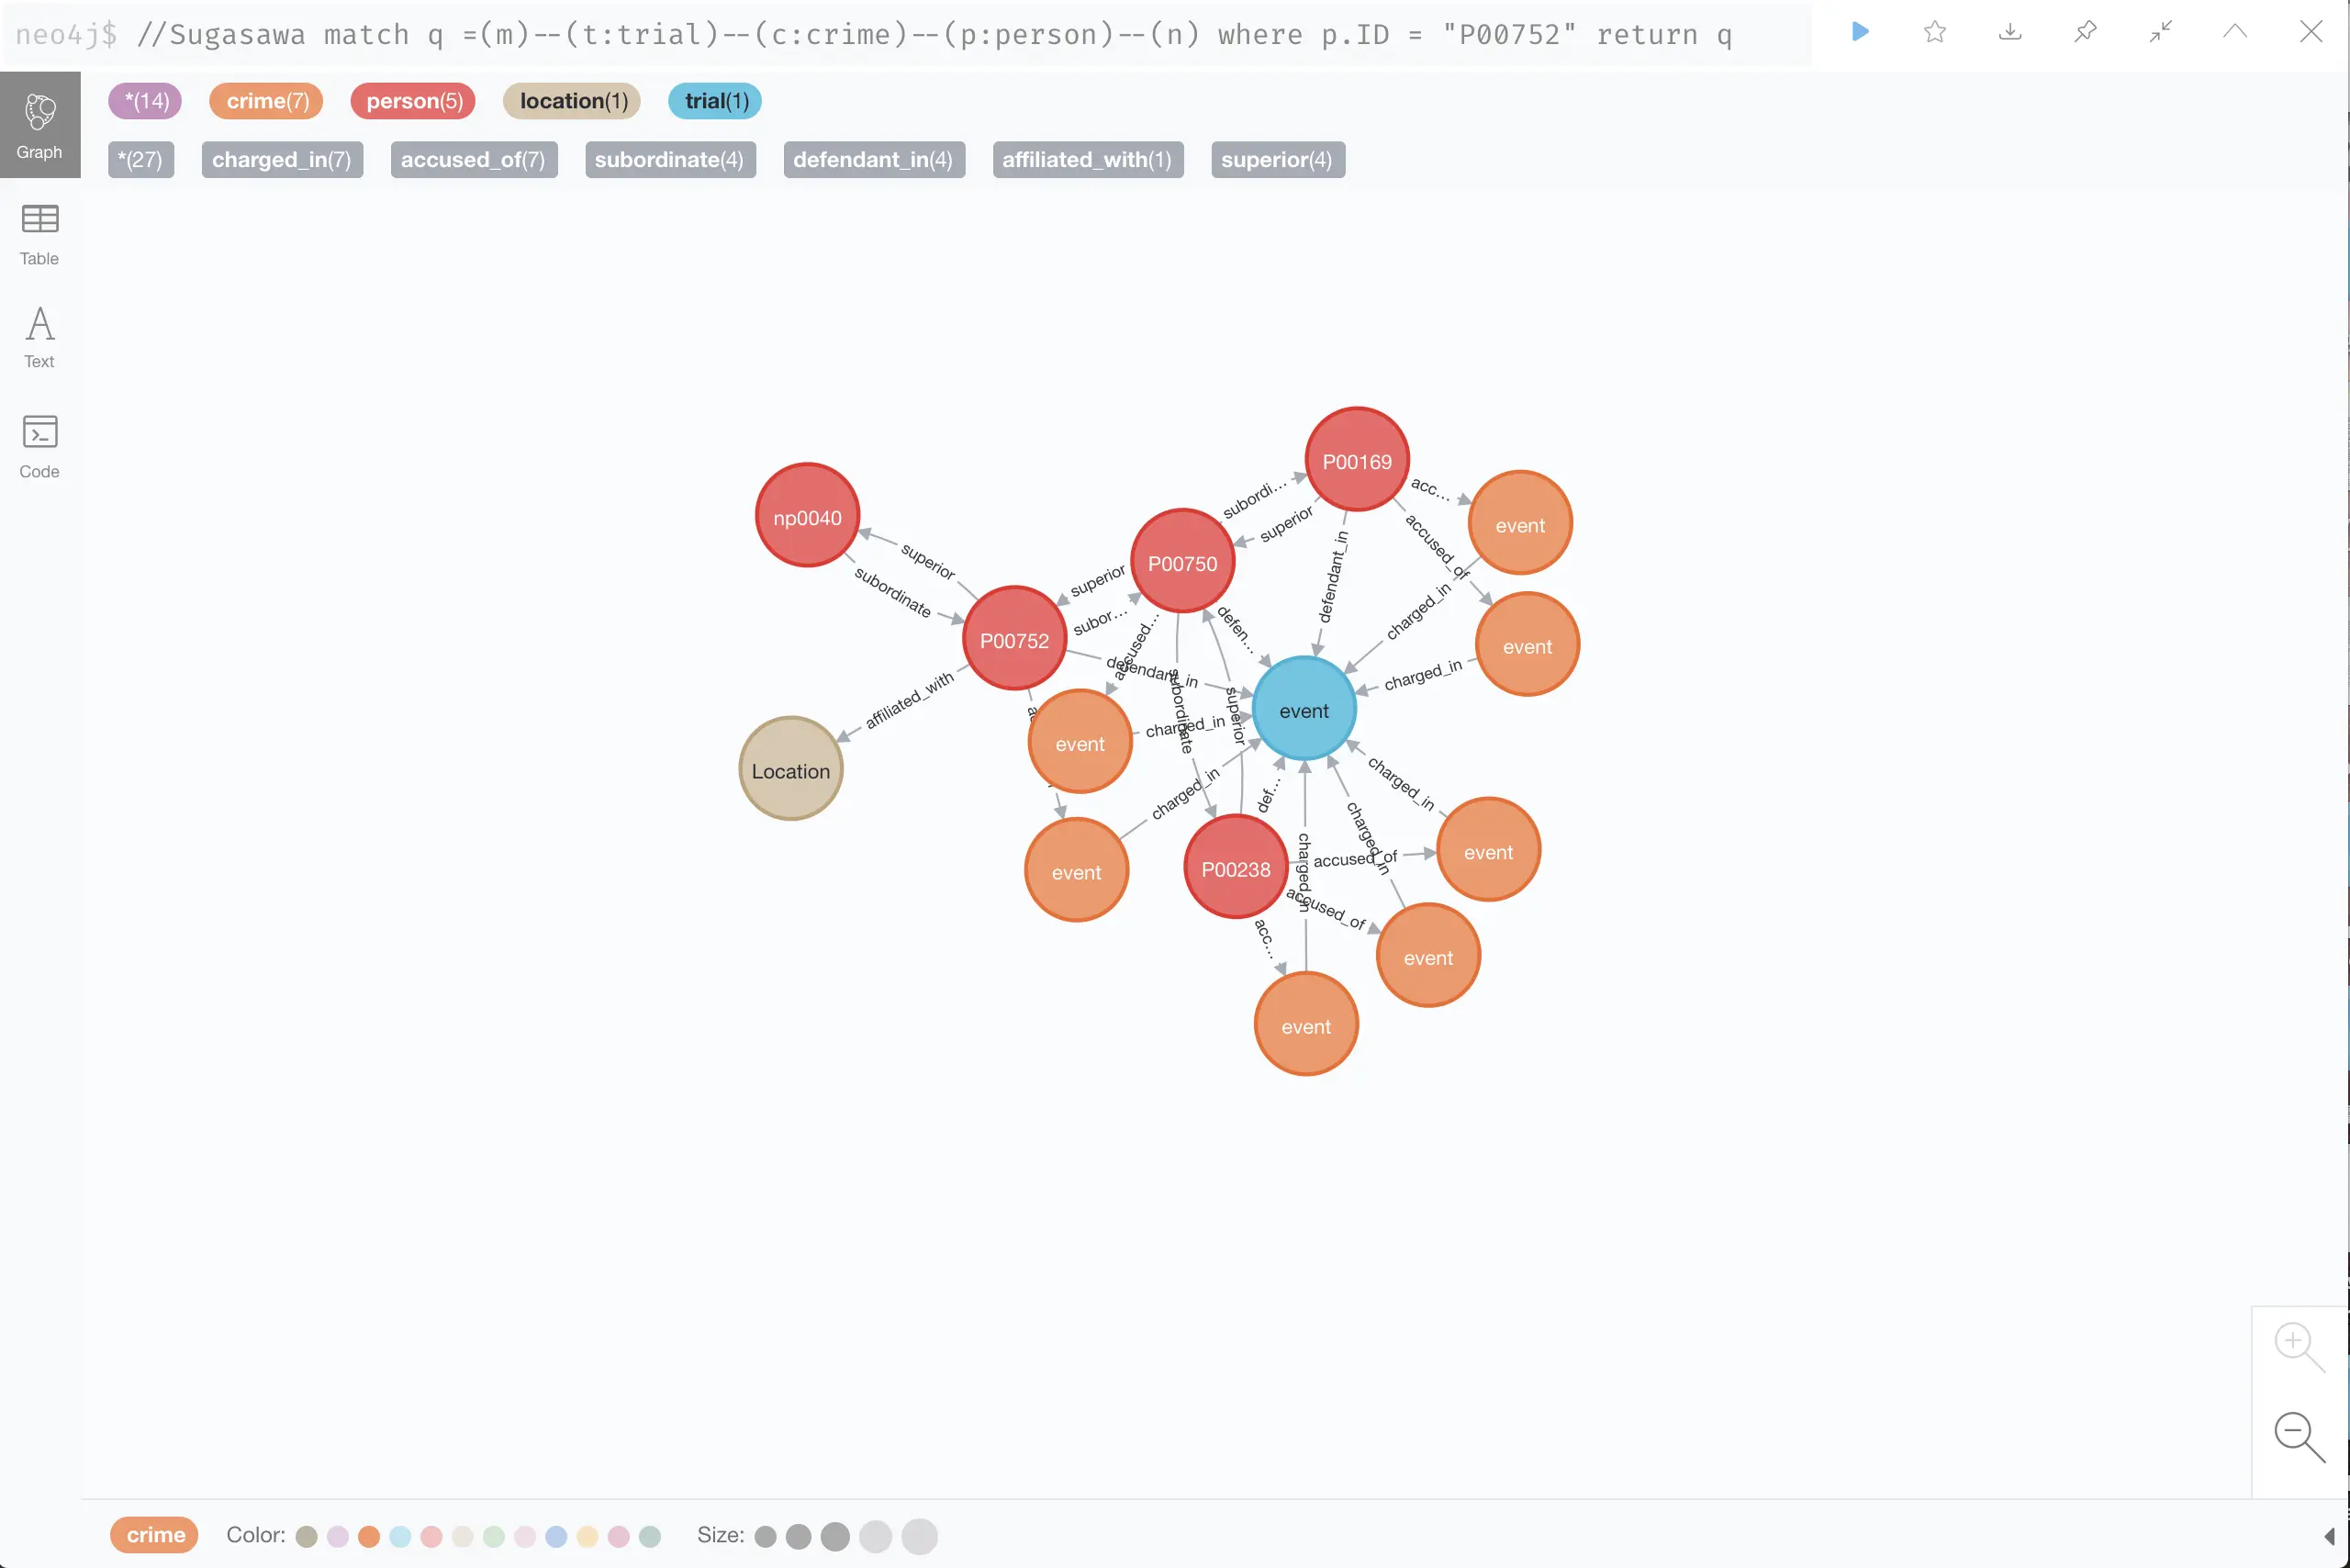 Neo4j graph with visualization options